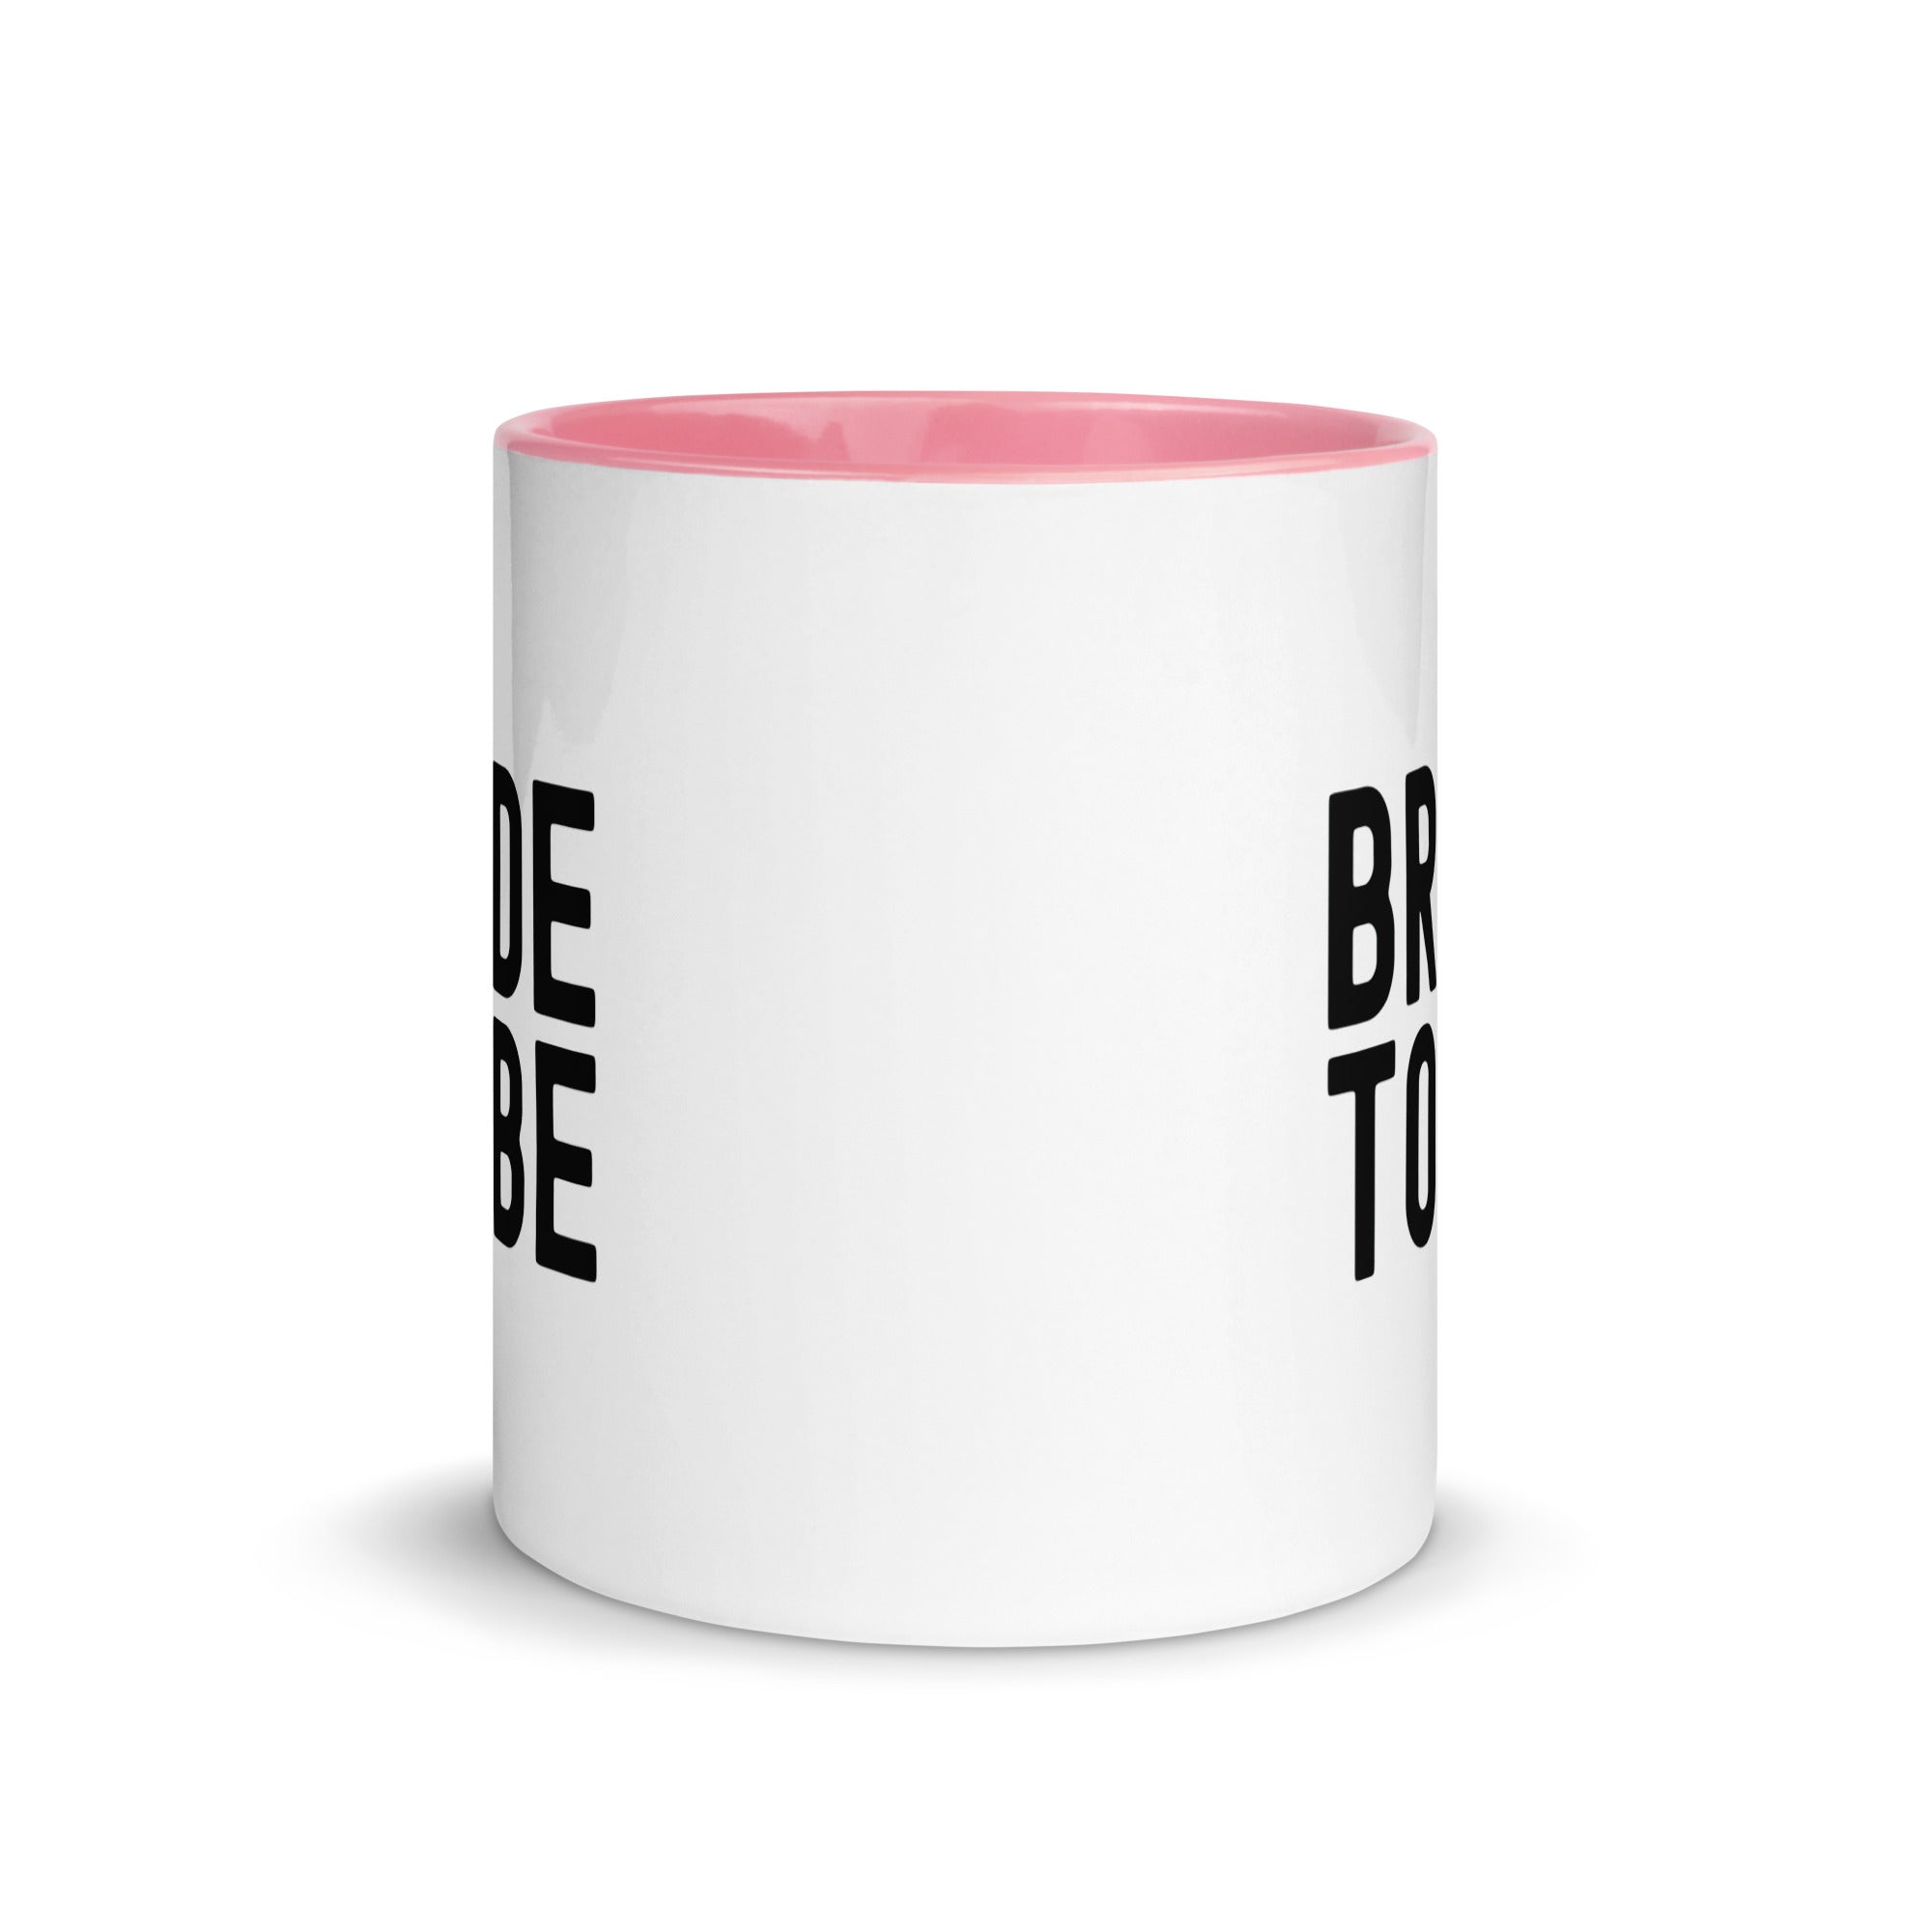 Mug with Color Inside | Bride to be